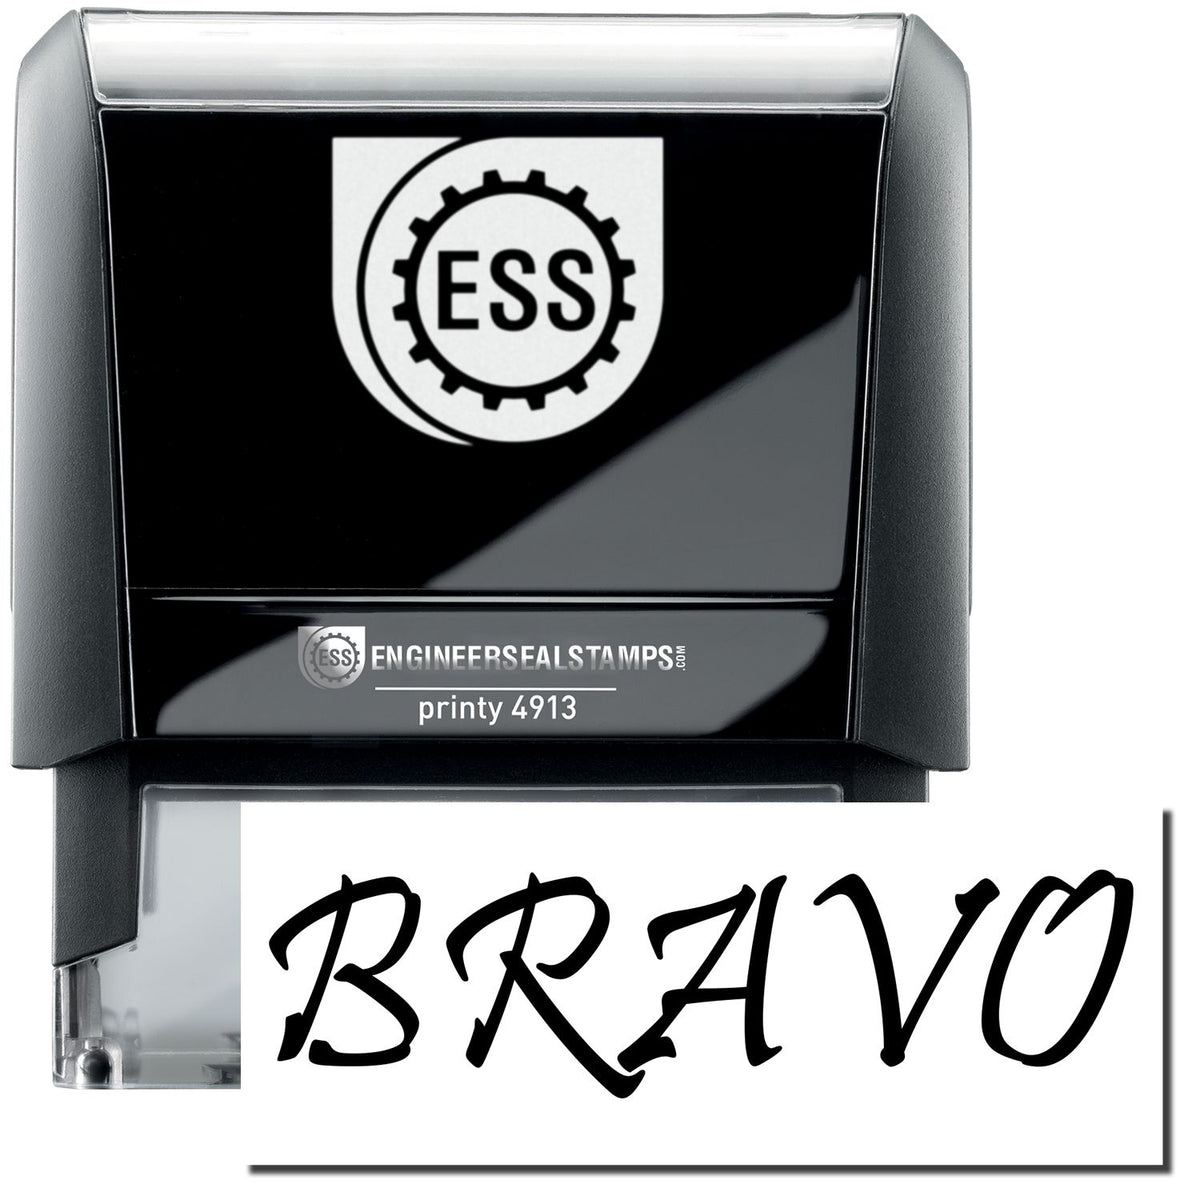 A self-inking stamp with a stamped image showing how the text &quot;BRAVO&quot; in a large bold font is displayed by it.